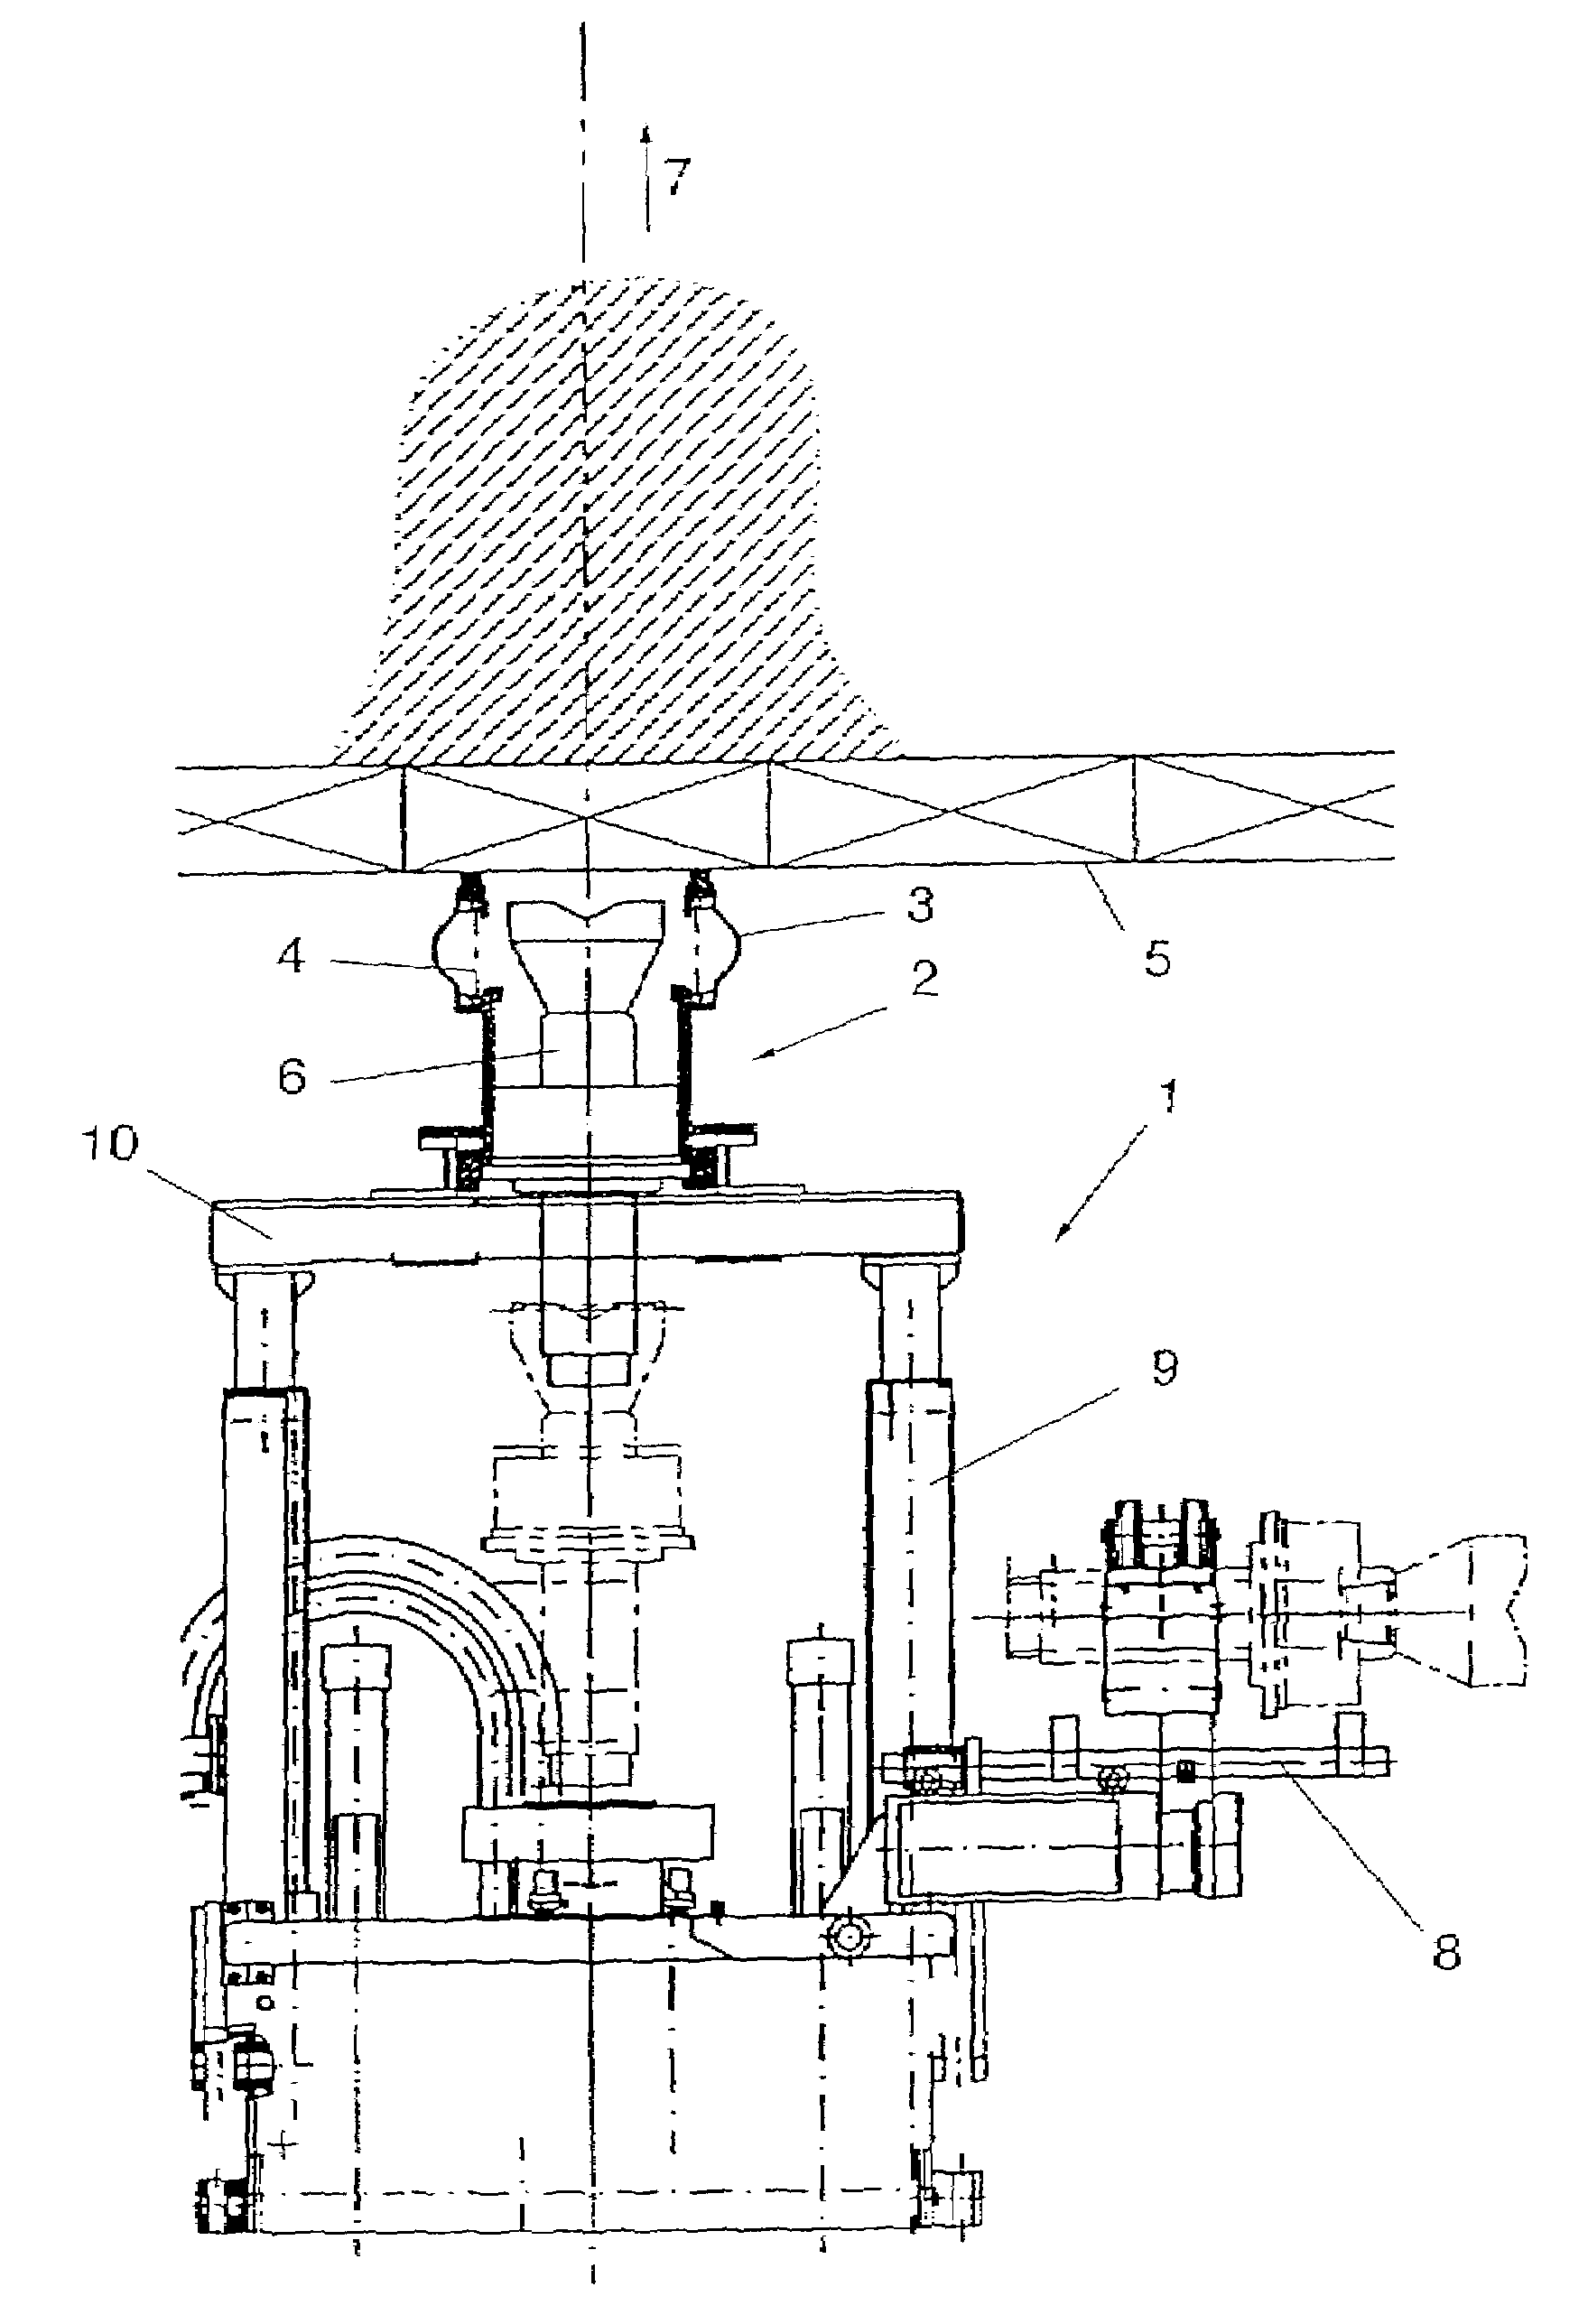 Device for sealing a drill hole and for discharging drillings or stripped extraction material